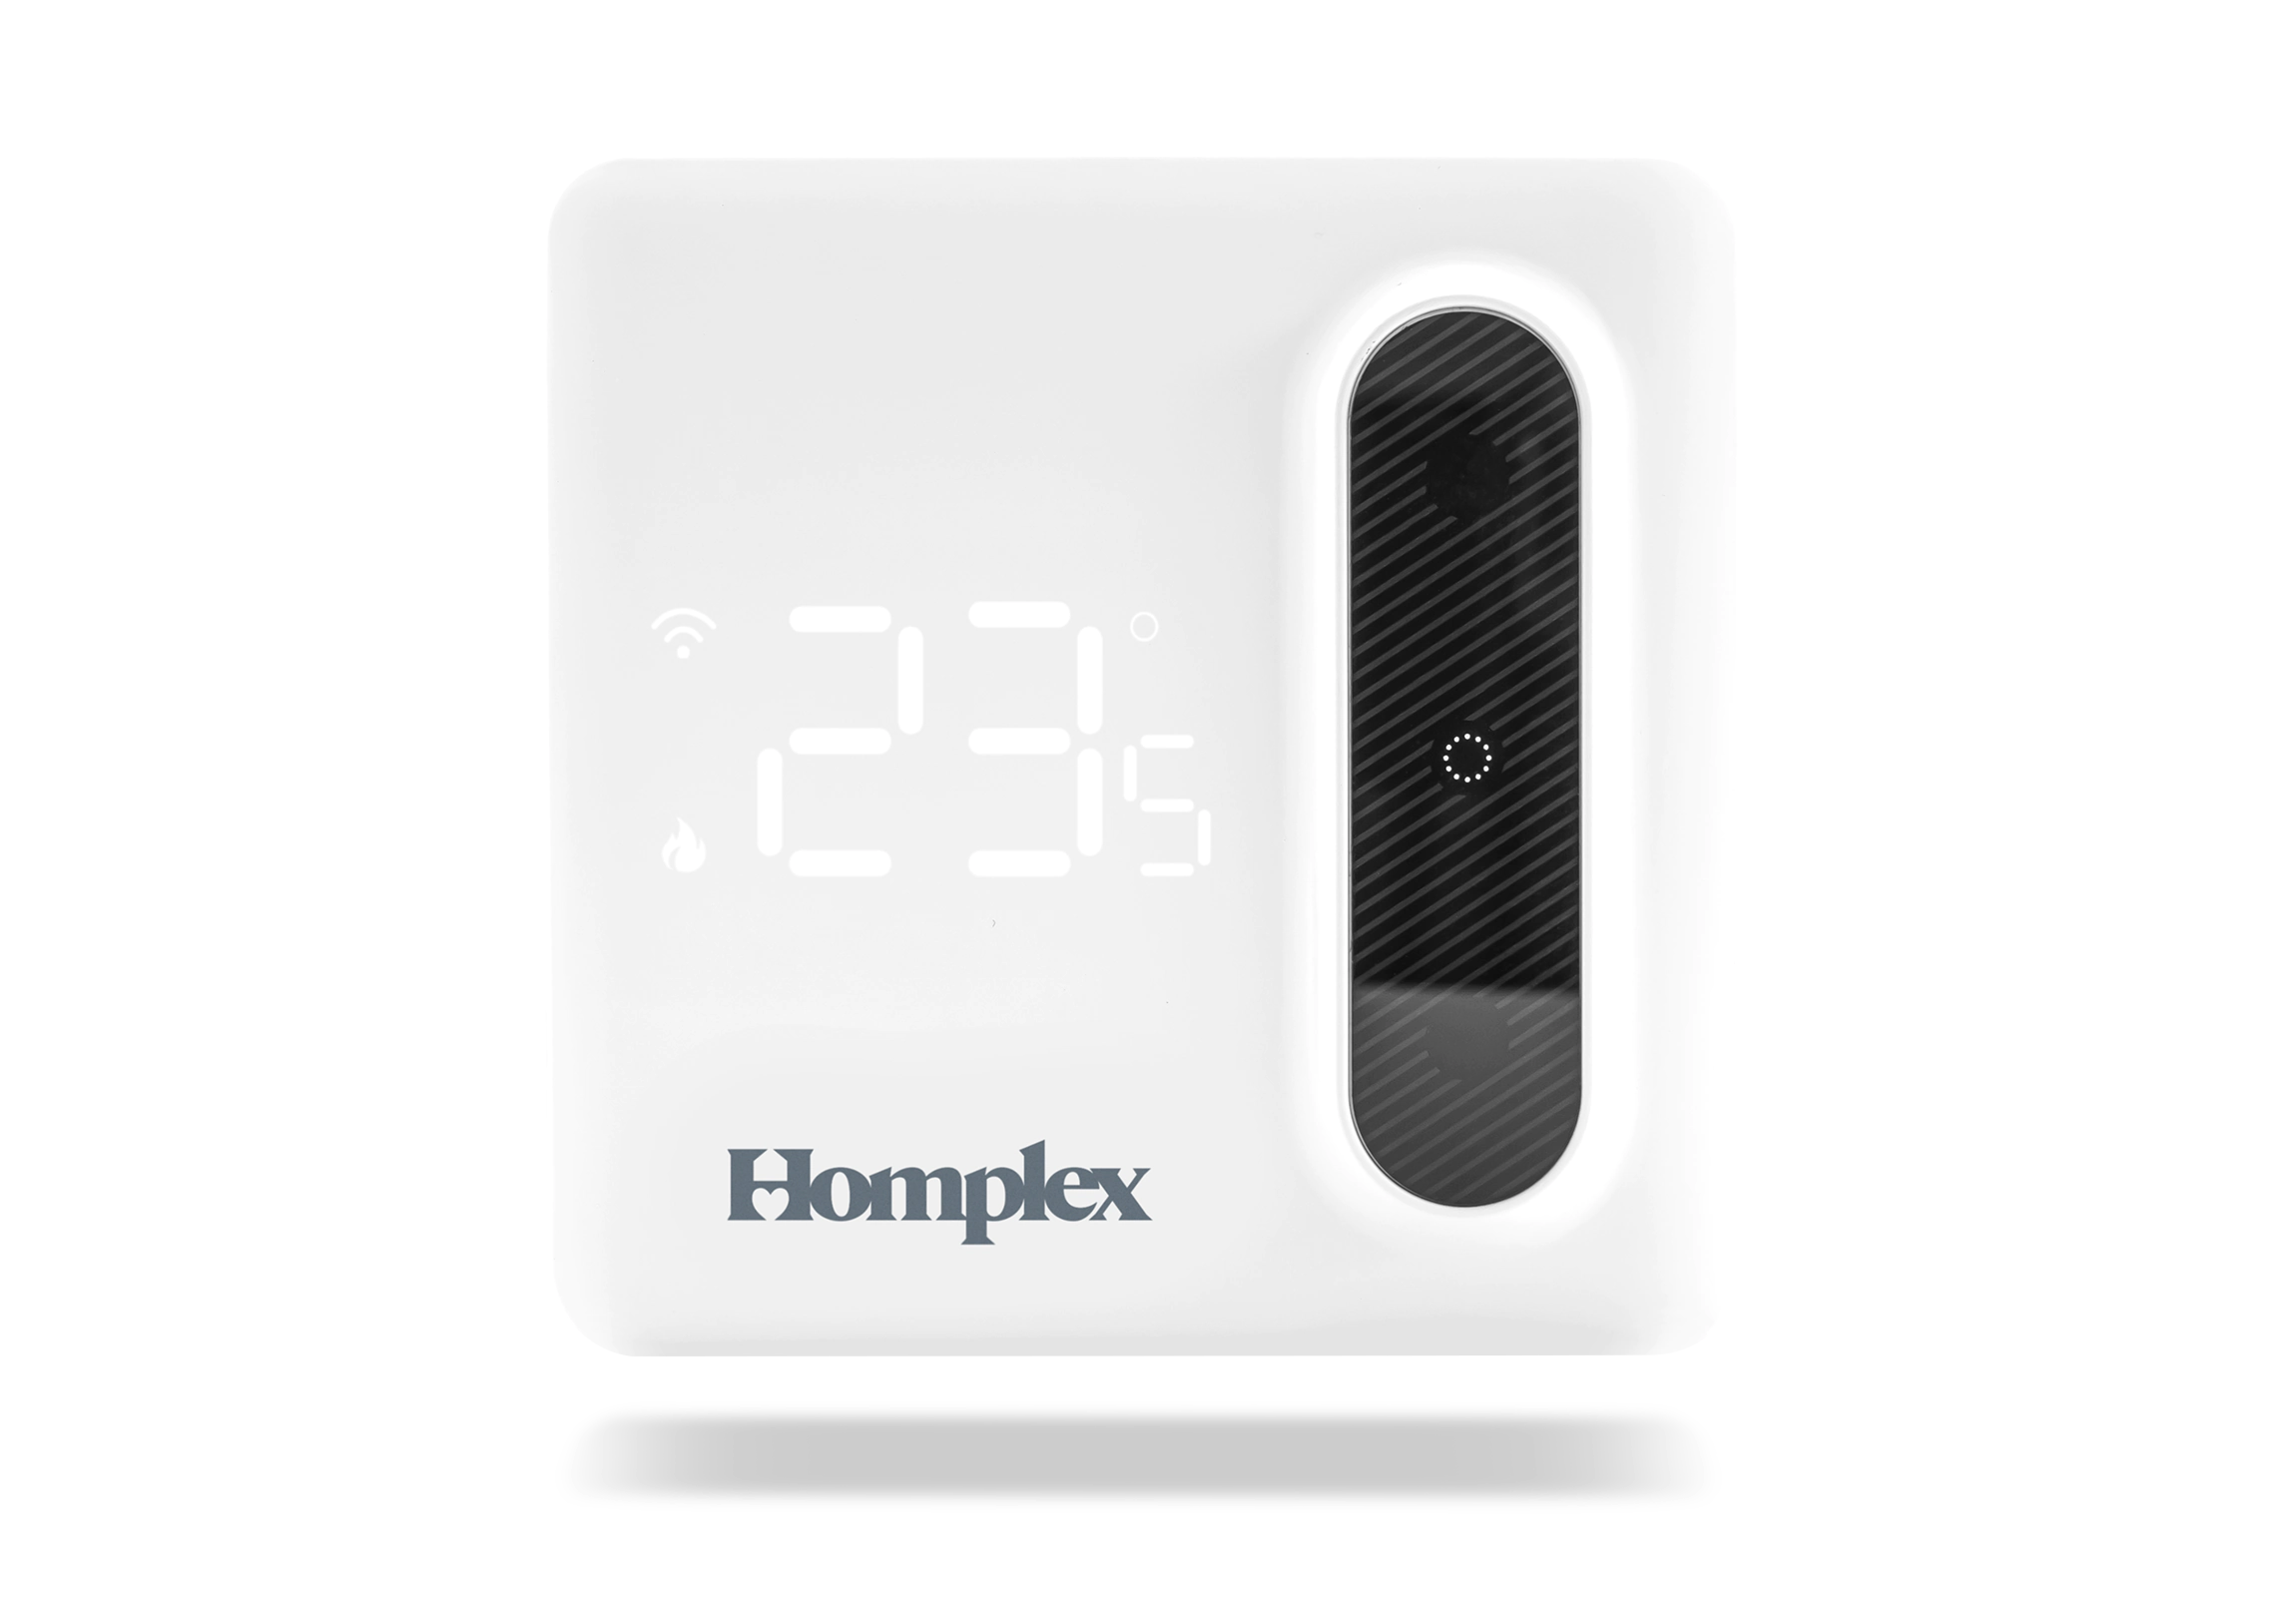 Homplex HT2310 WR intelligent room thermostat, front view